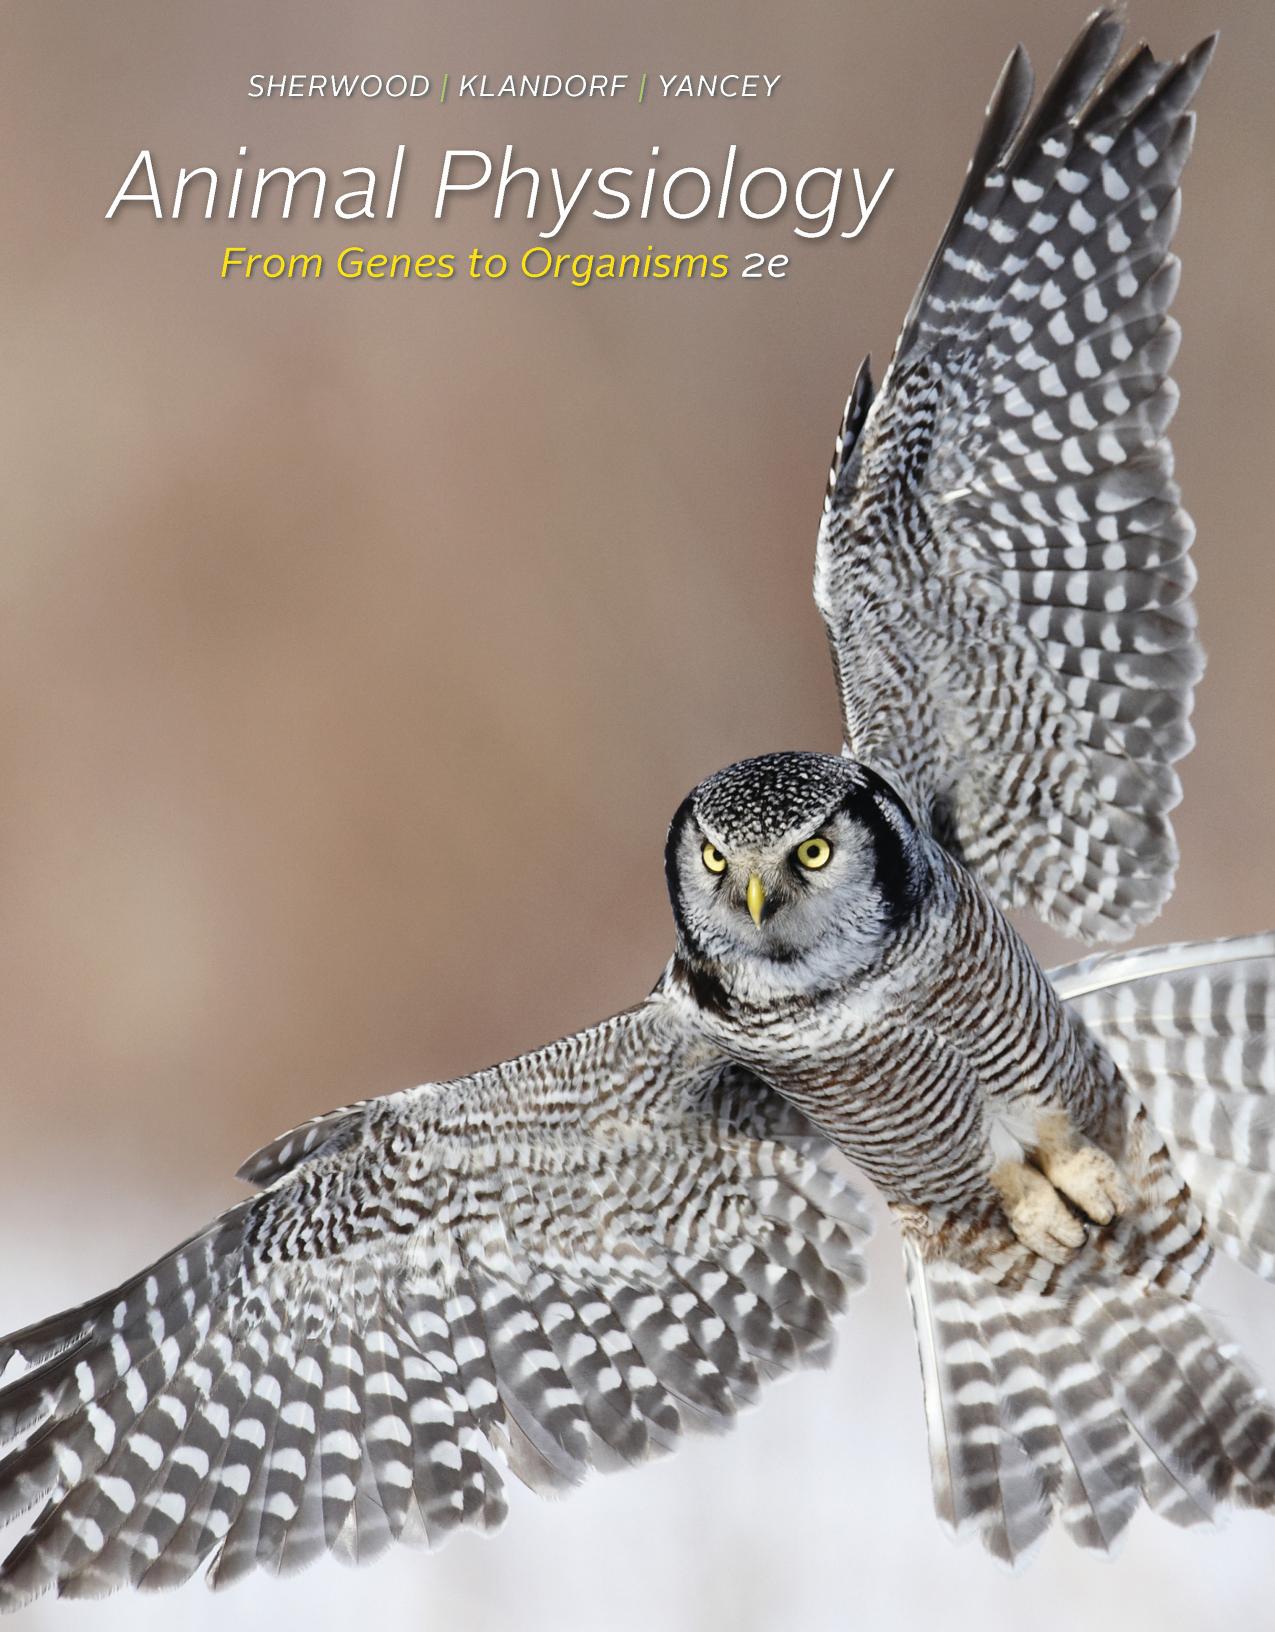 Animal Physiology: From Genes to Organisms, 2nd ed.